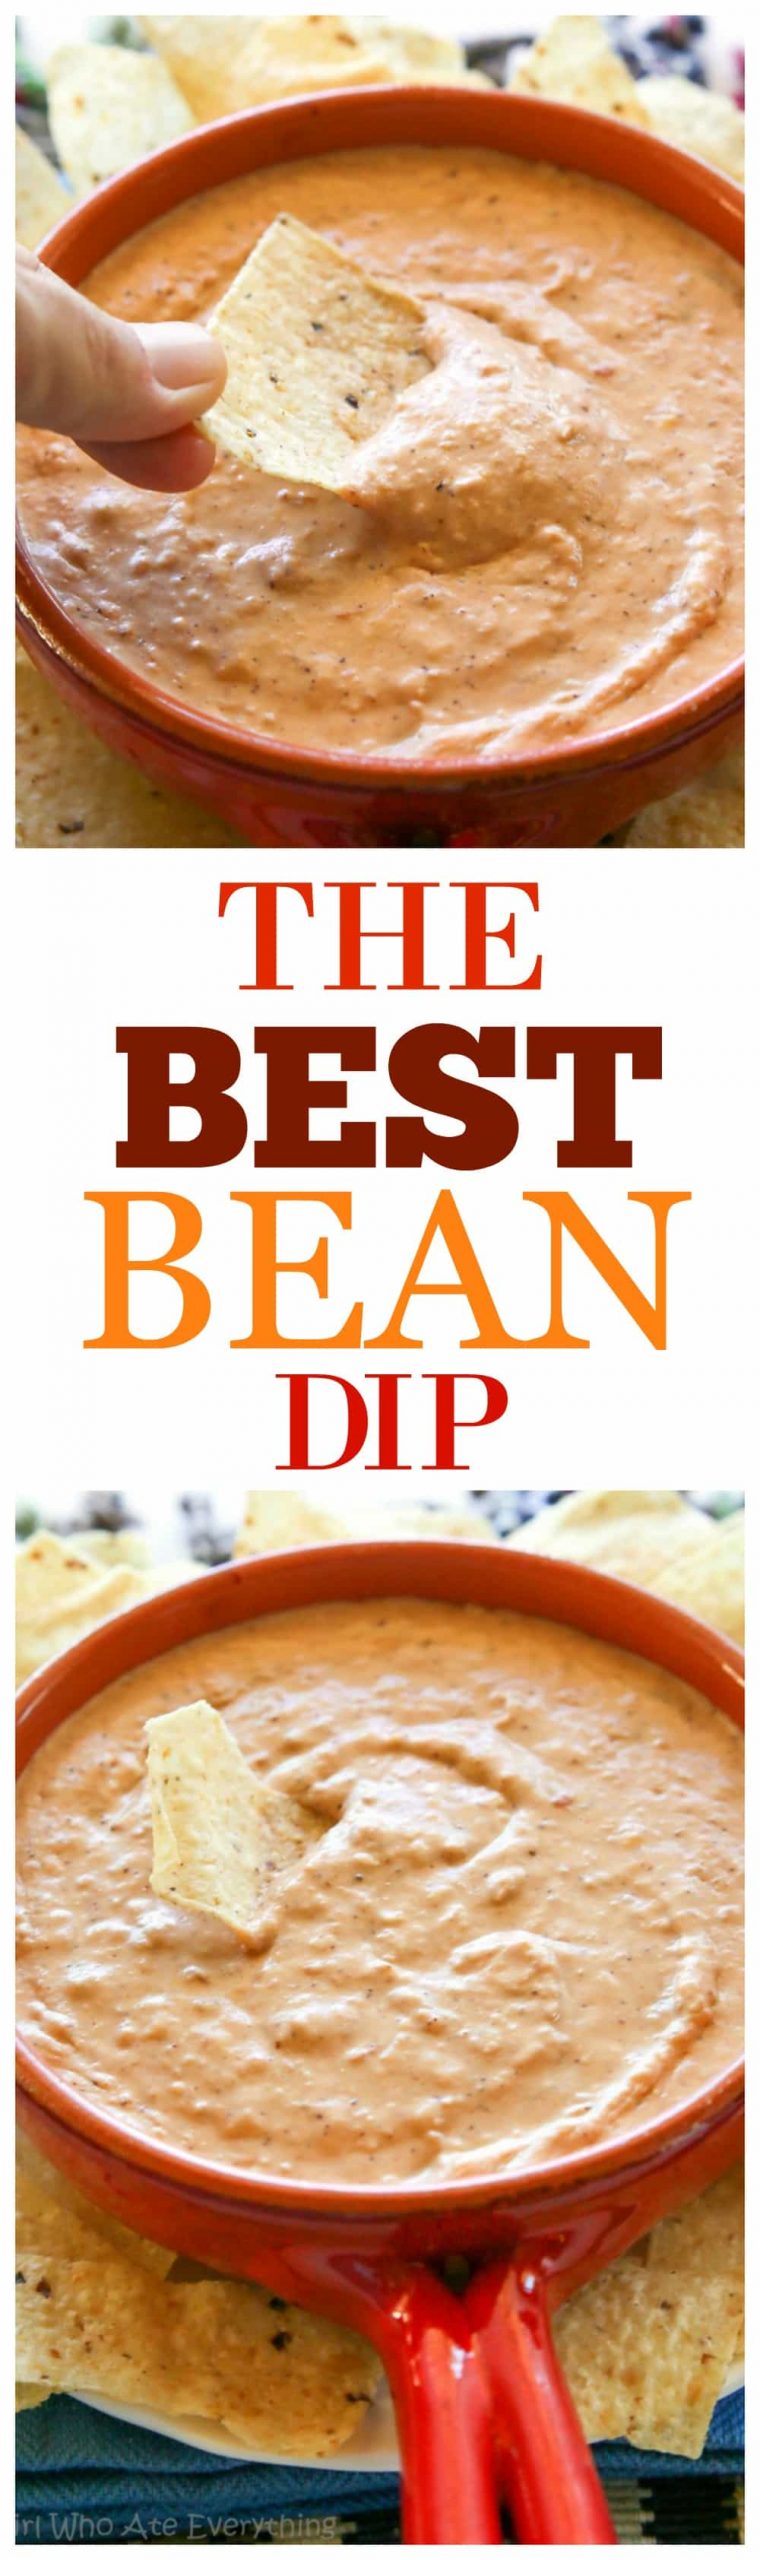 This is the Best Bean Dip Ever - creamy, spicy, and the perfect texture for dipping. Bring it to a friend's house to watch the game and it'll be a hit. #bean #dip #recipe #mexican #appetizer